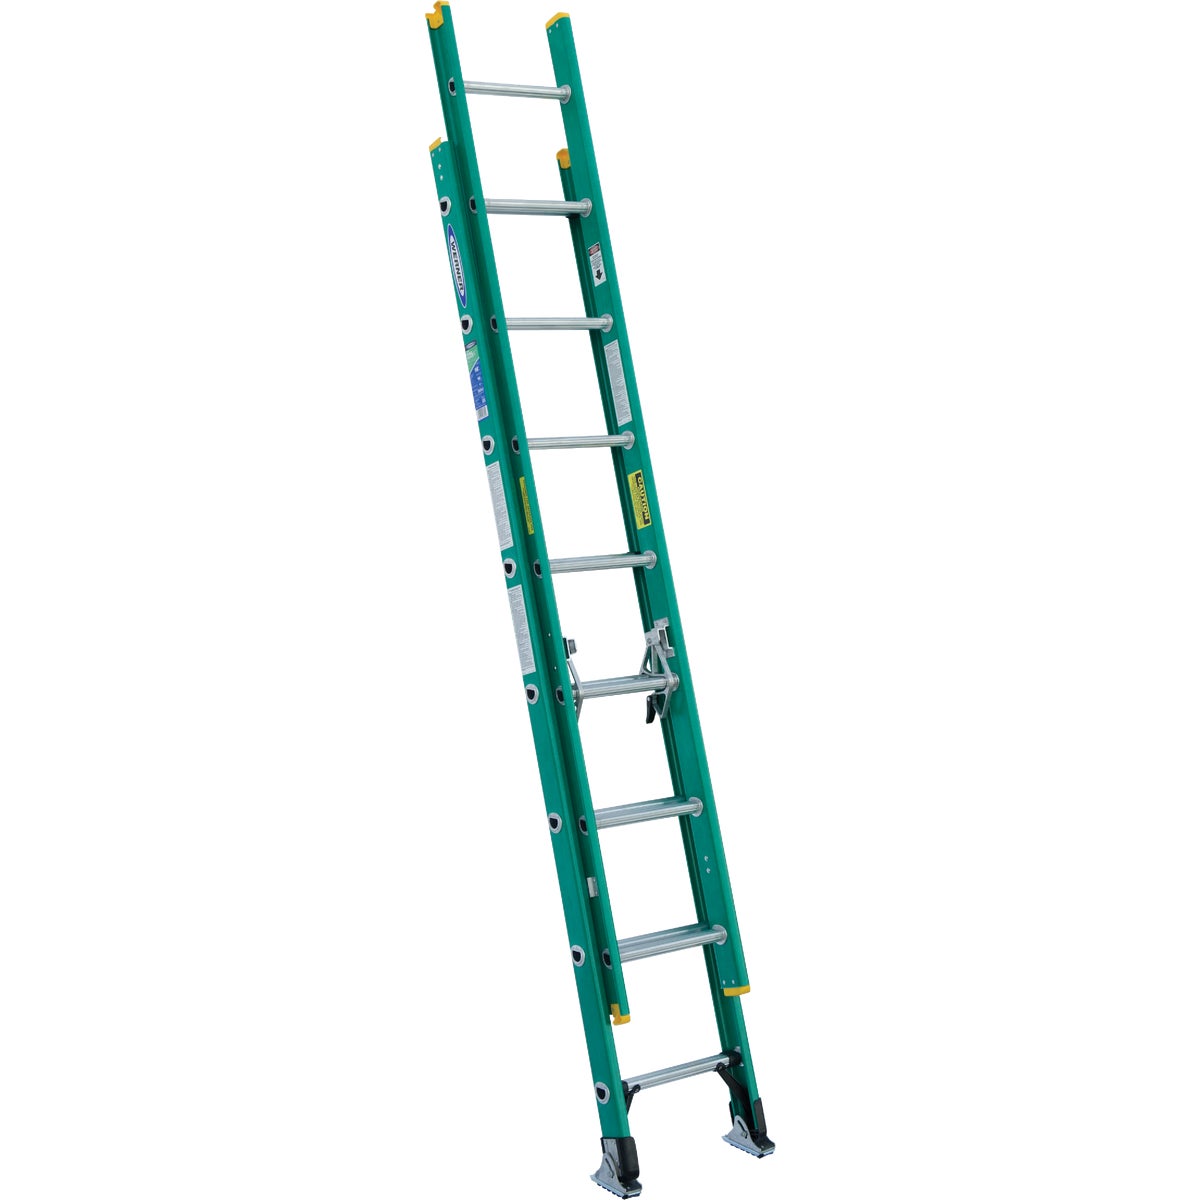 Item 788342, Medium-duty or commercial use extension ladder.